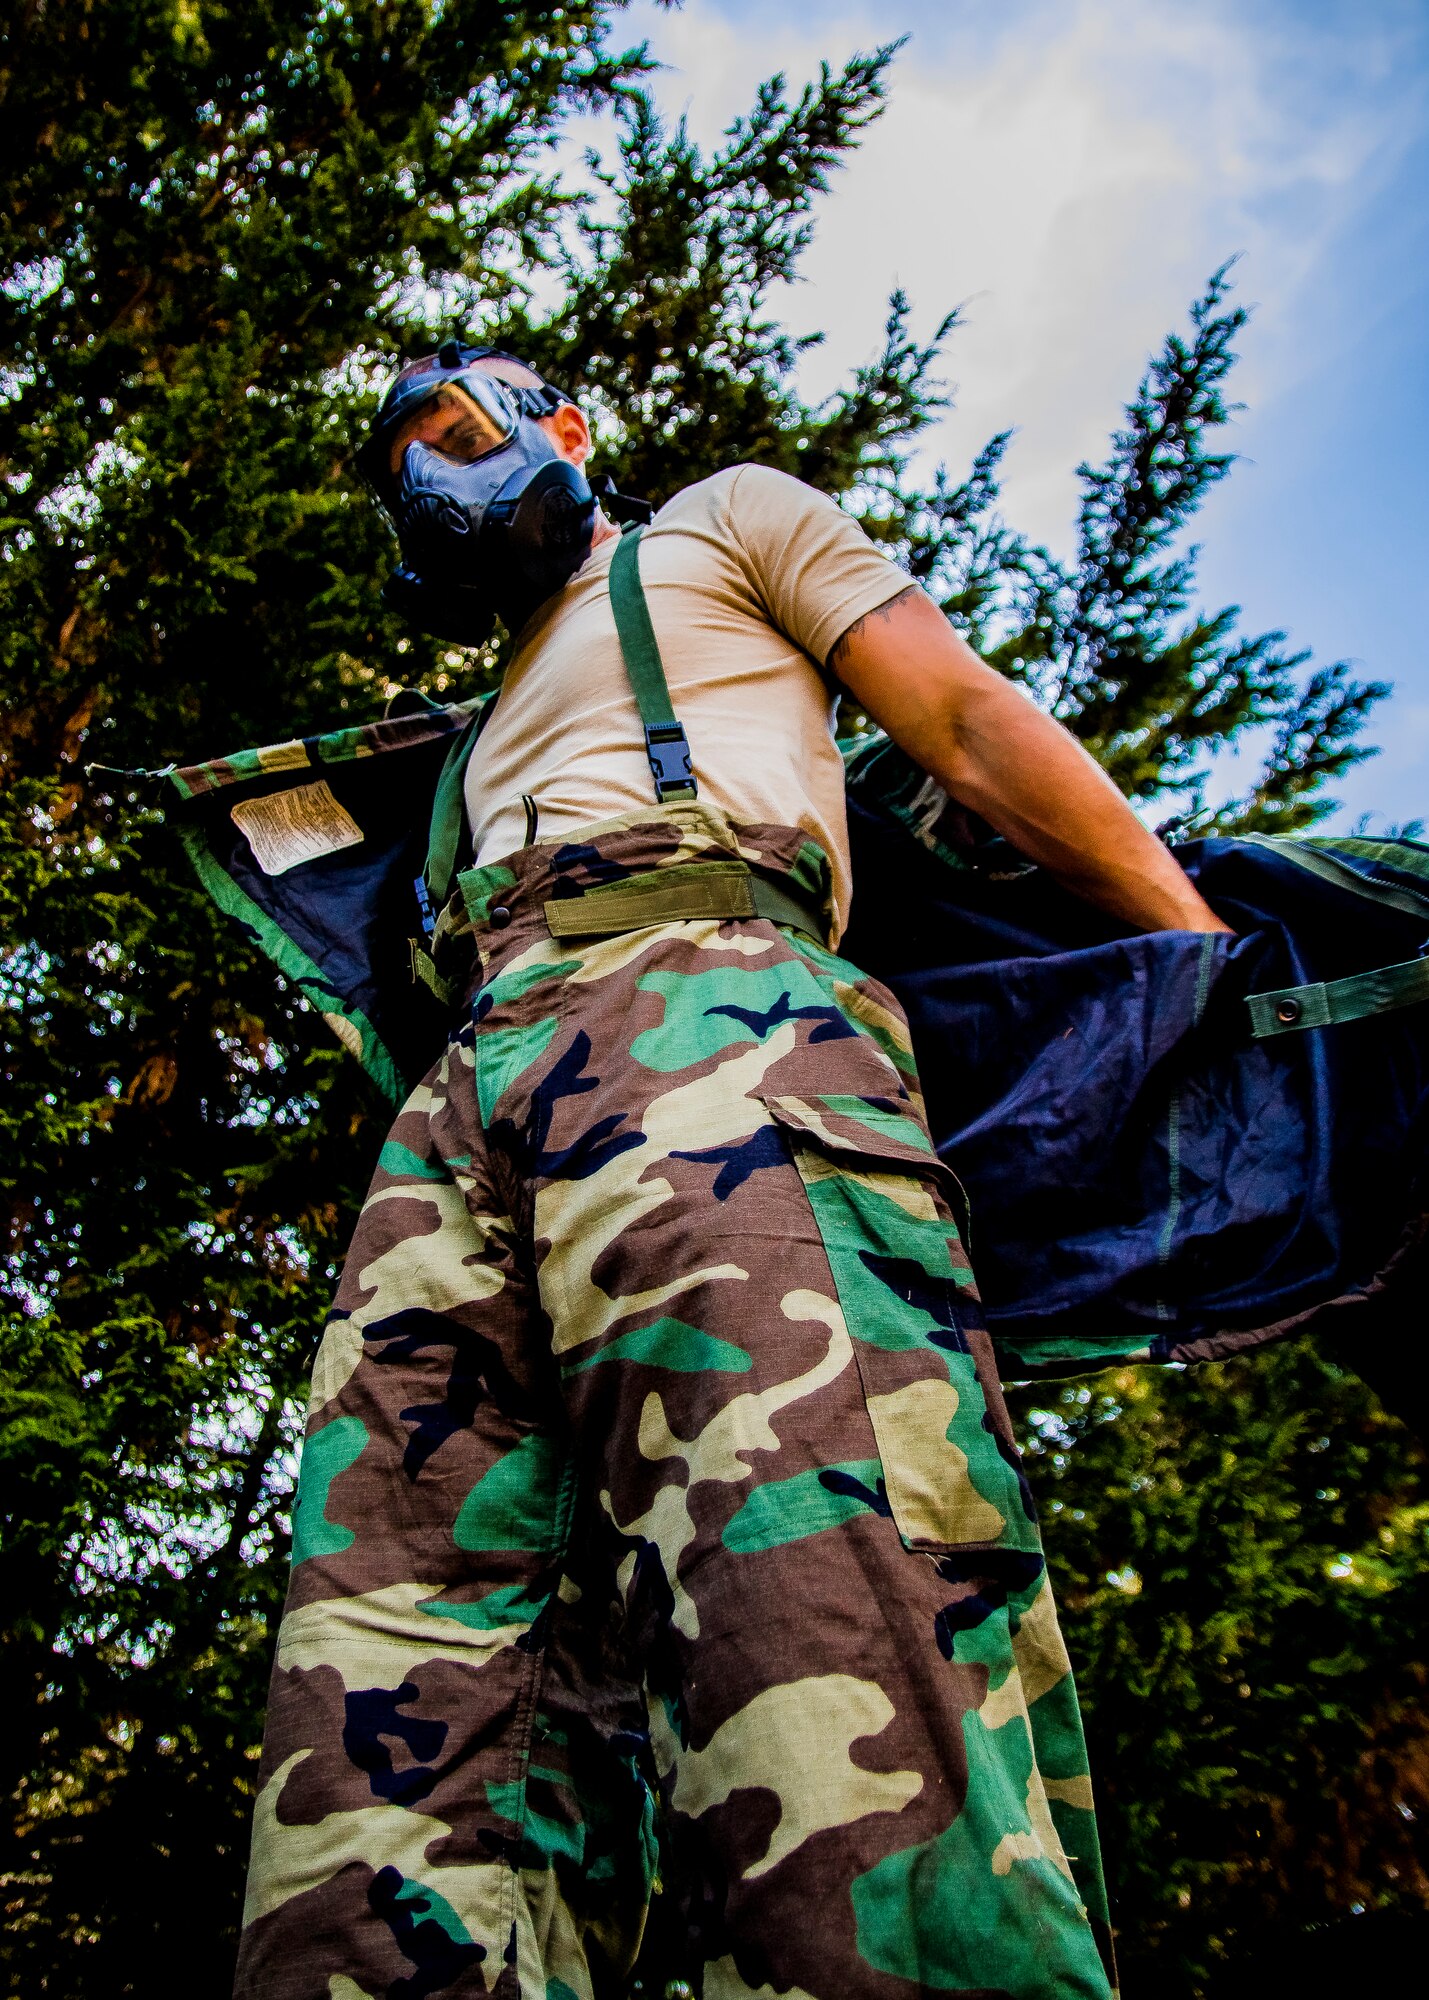 Staff Sgt. Kyle Bosshardt, 446th Aeromedical Staging Squadron medic, dons Mission Oriented Protective Posture gear in preparation for the annual Expert Field Medical Badge test at McChord Field, Wash., Aug. 2, 2015. The Expert Field Medical Badge is a unique distinction worn only by the most battle-ready and elite medical personnel in the military. Every year at Joint Base Lewis-McChord, Wash., a  two-week intensive testing event is set up to qualify eligible service members from around the country for the right to wear the coveted badge. (U.S. Air Force photo by Senior Airman Daniel Liddicoet)